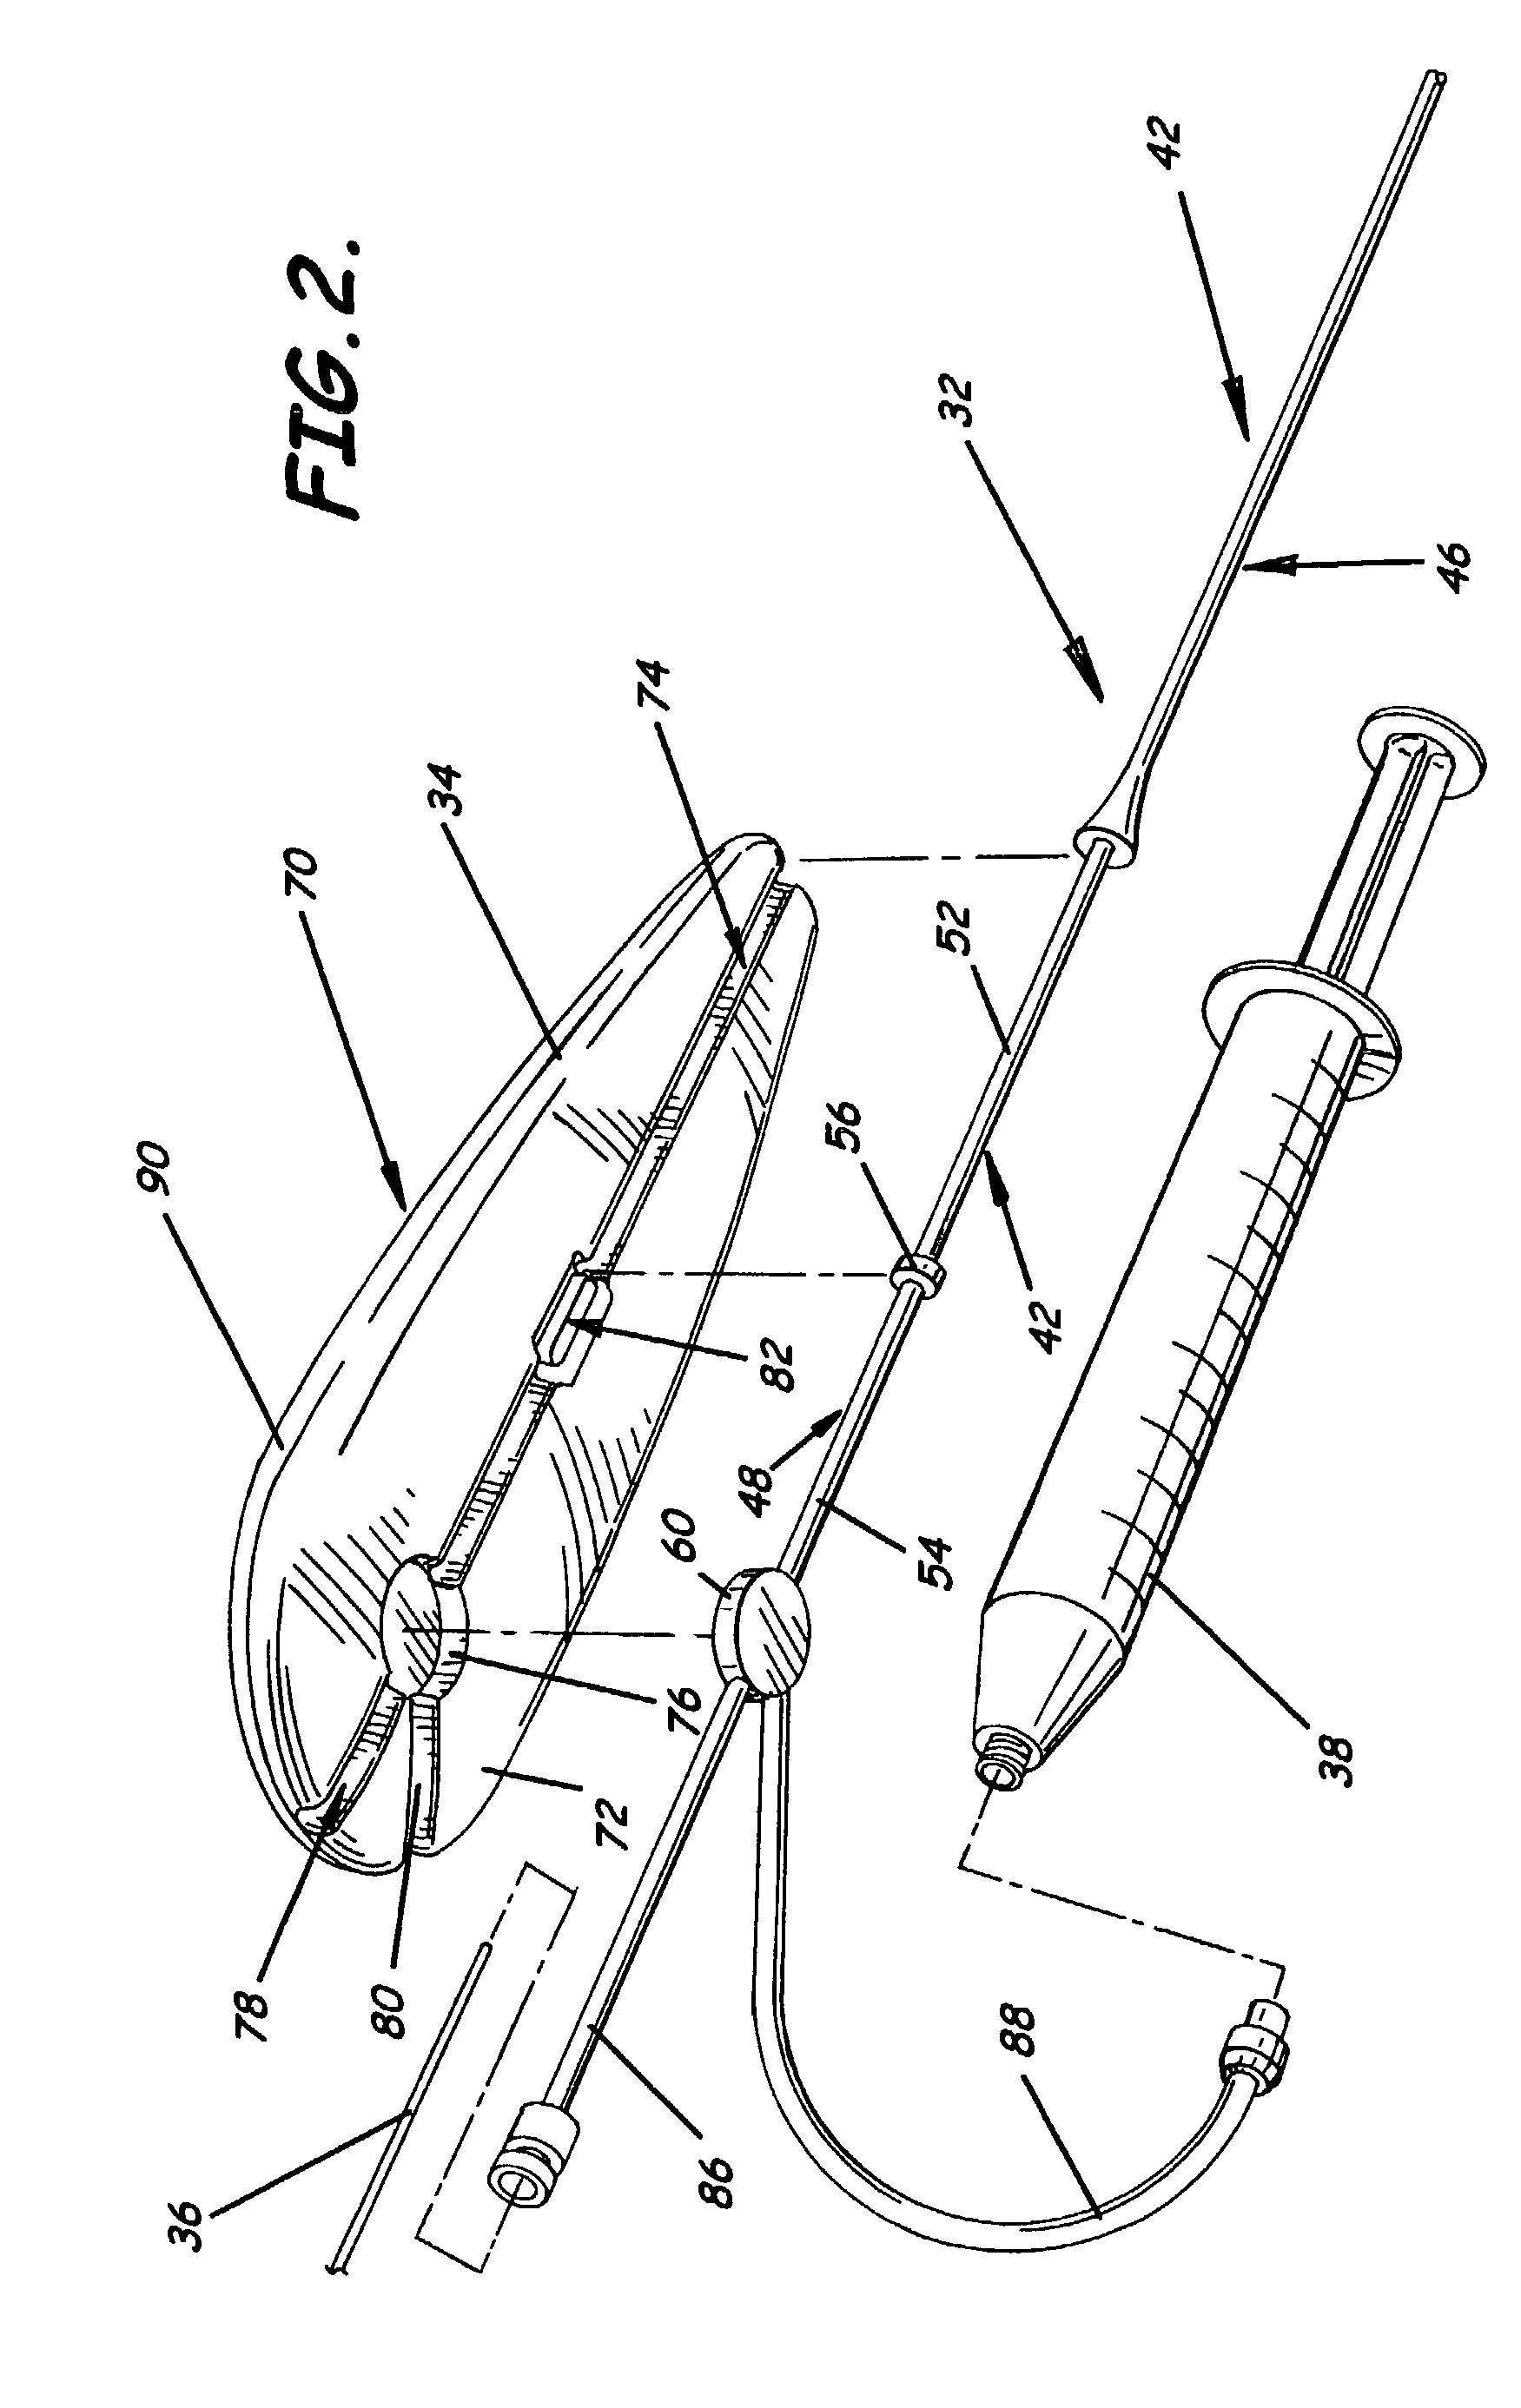 Steerable dilatation system, dilator, and related methods for stepped dilatation